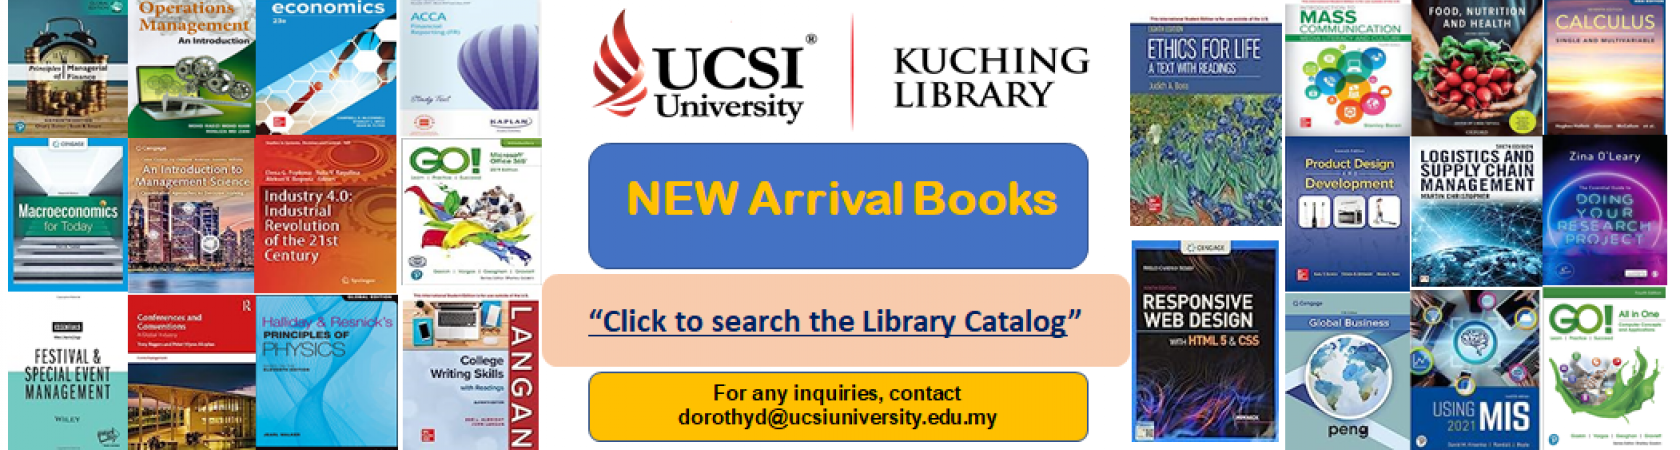 Kuching Library New Arrival Books